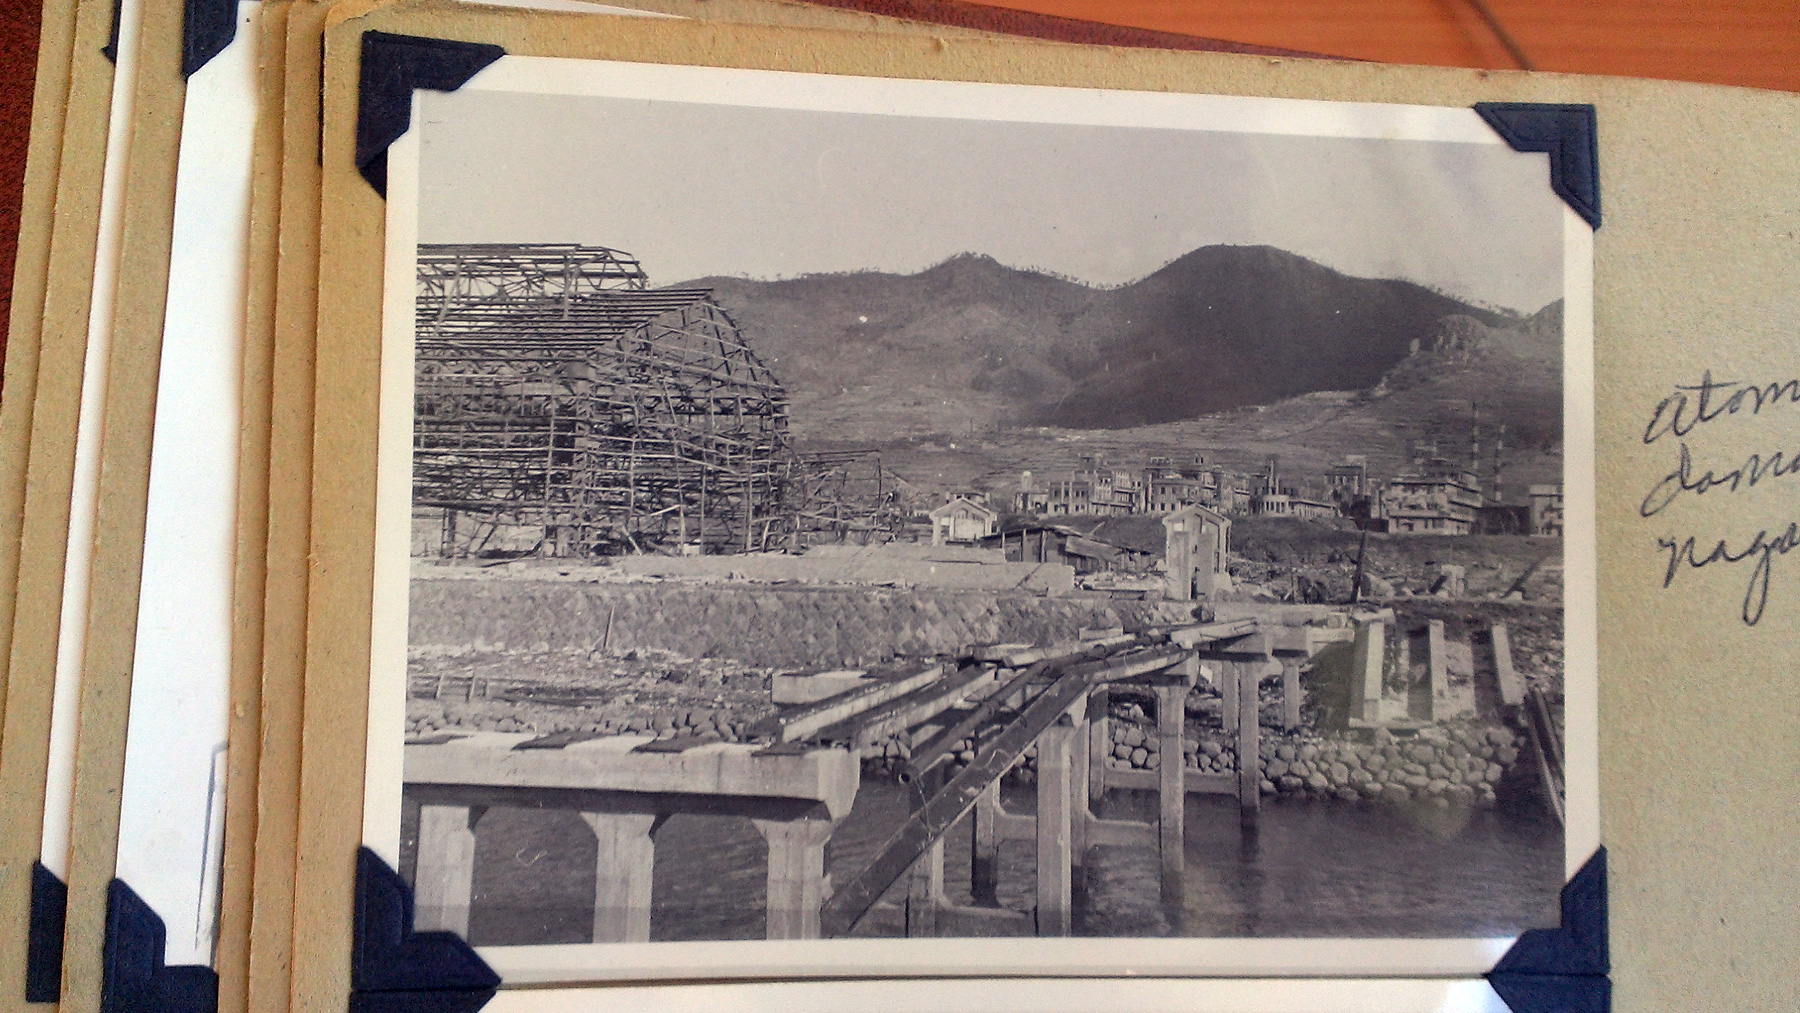 Nagasaki, Japan after the nuclear bomb. Photo courtesy of Ernest Crippen.